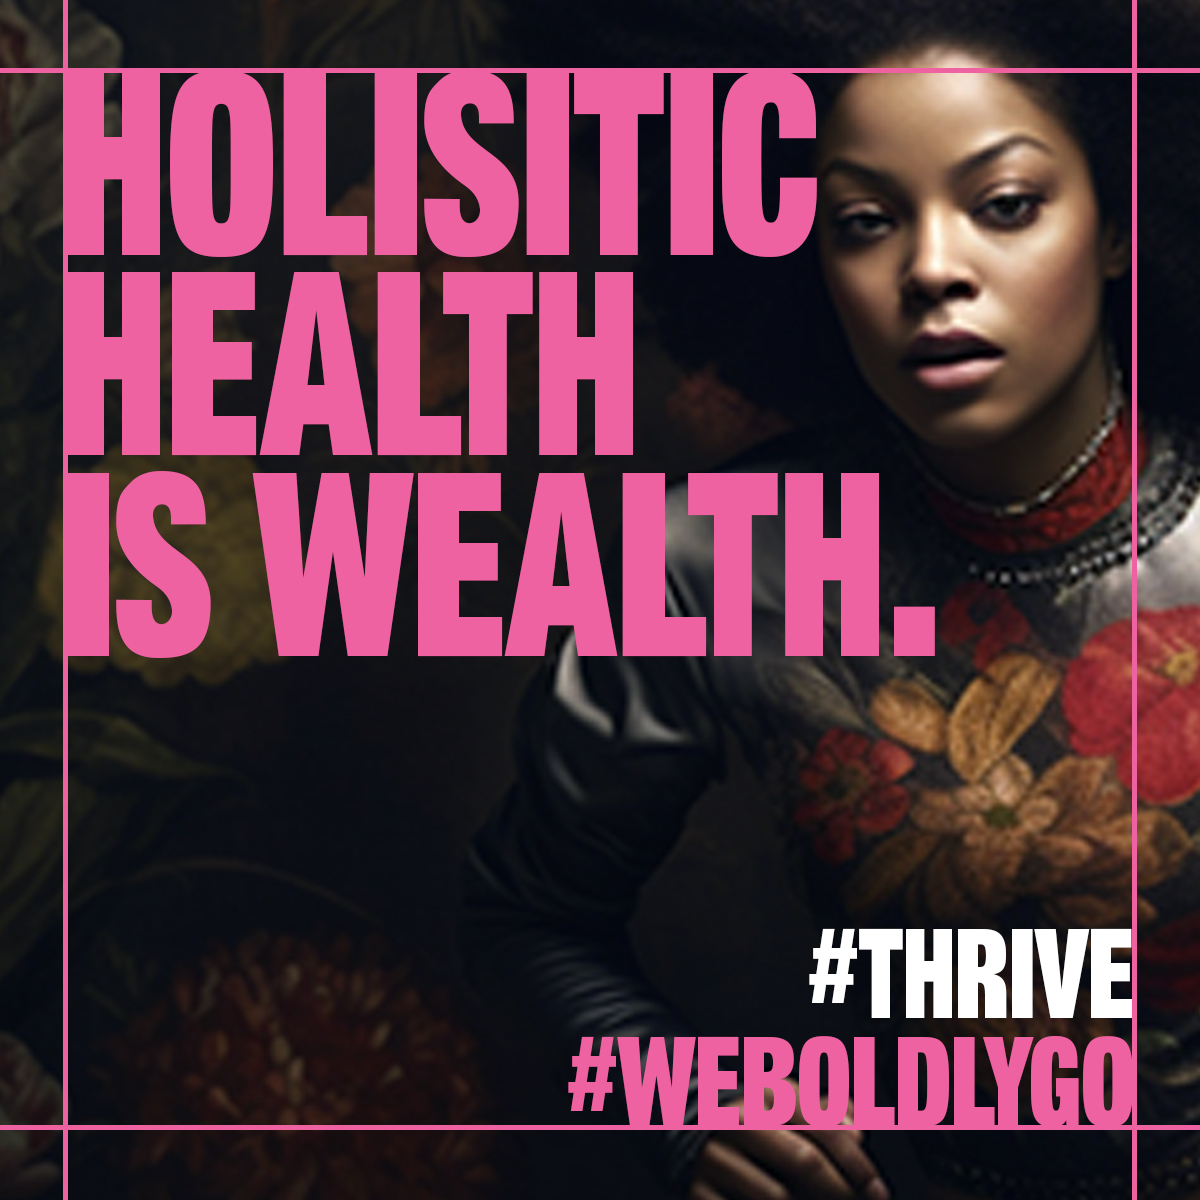 #Thrive: We believe in holistic health for our people. That means automatic access to Discovery’s Healthy Company Programme, which includes 8 one-on-one sessions with psychologists & trained mental health professionals when needed. #WeBoldlyGo